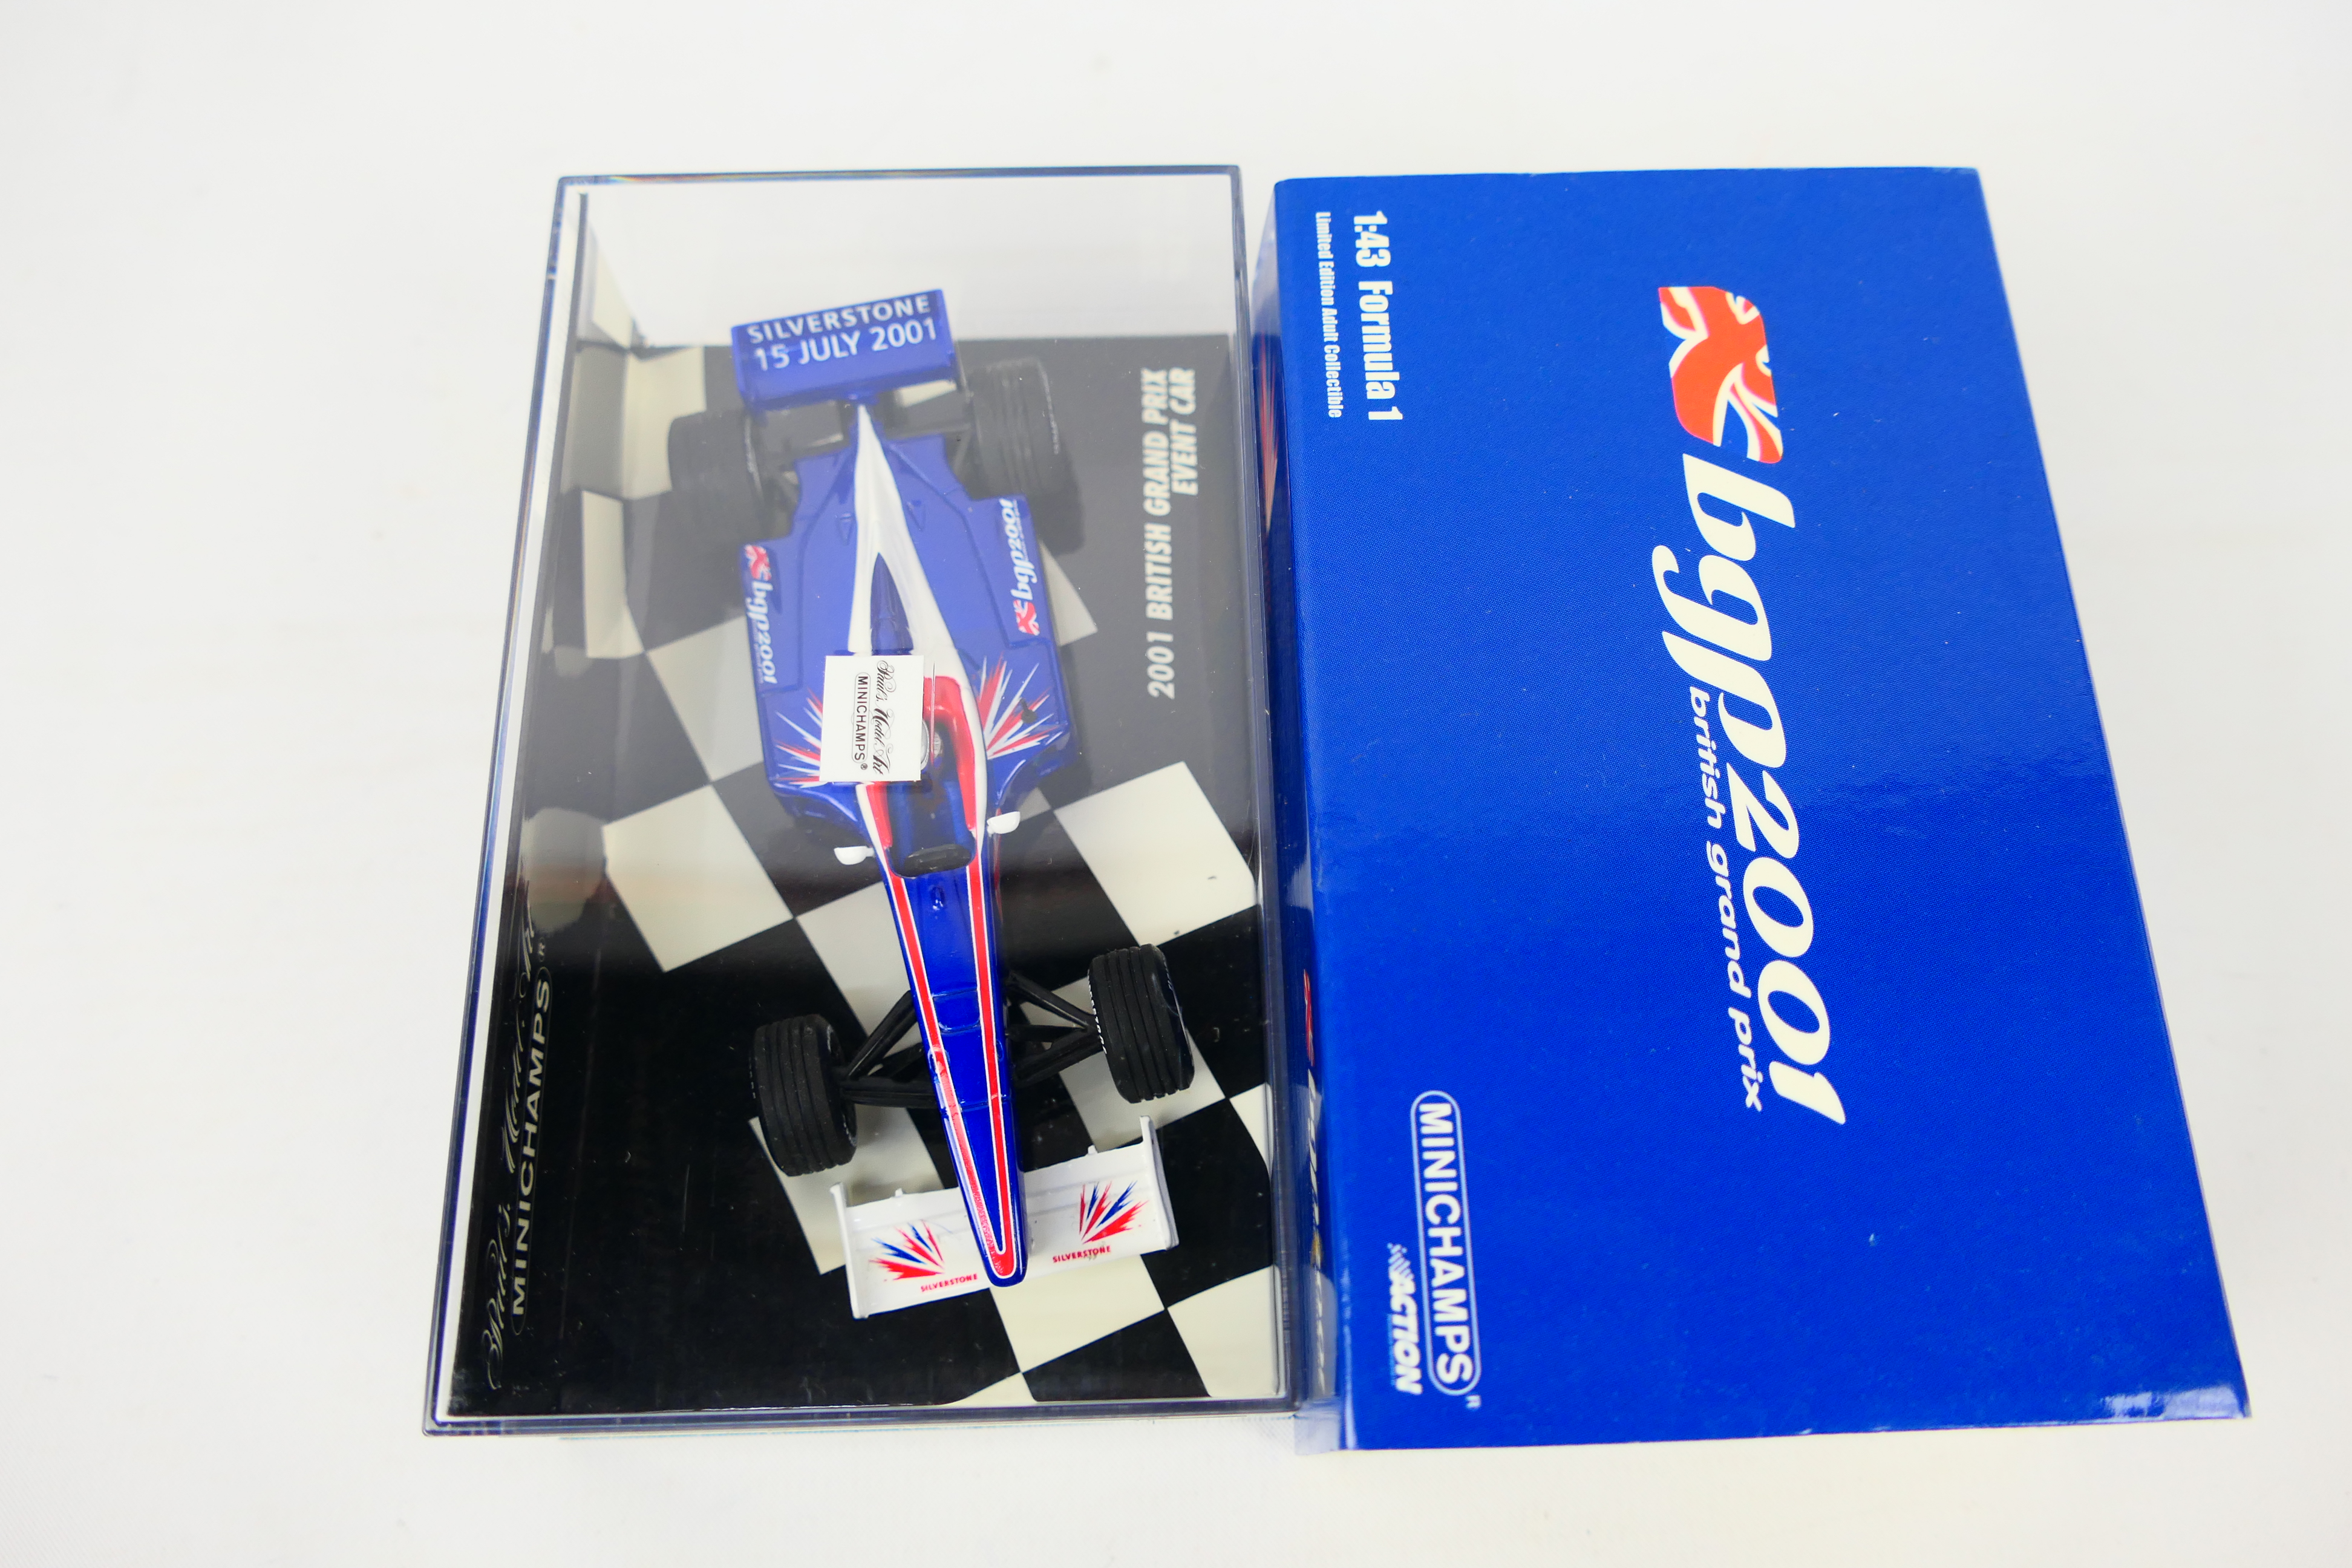 Minichamps - Seven boxed 1:43 scale diecast F1 racing cars from Minichamps. - Image 3 of 8